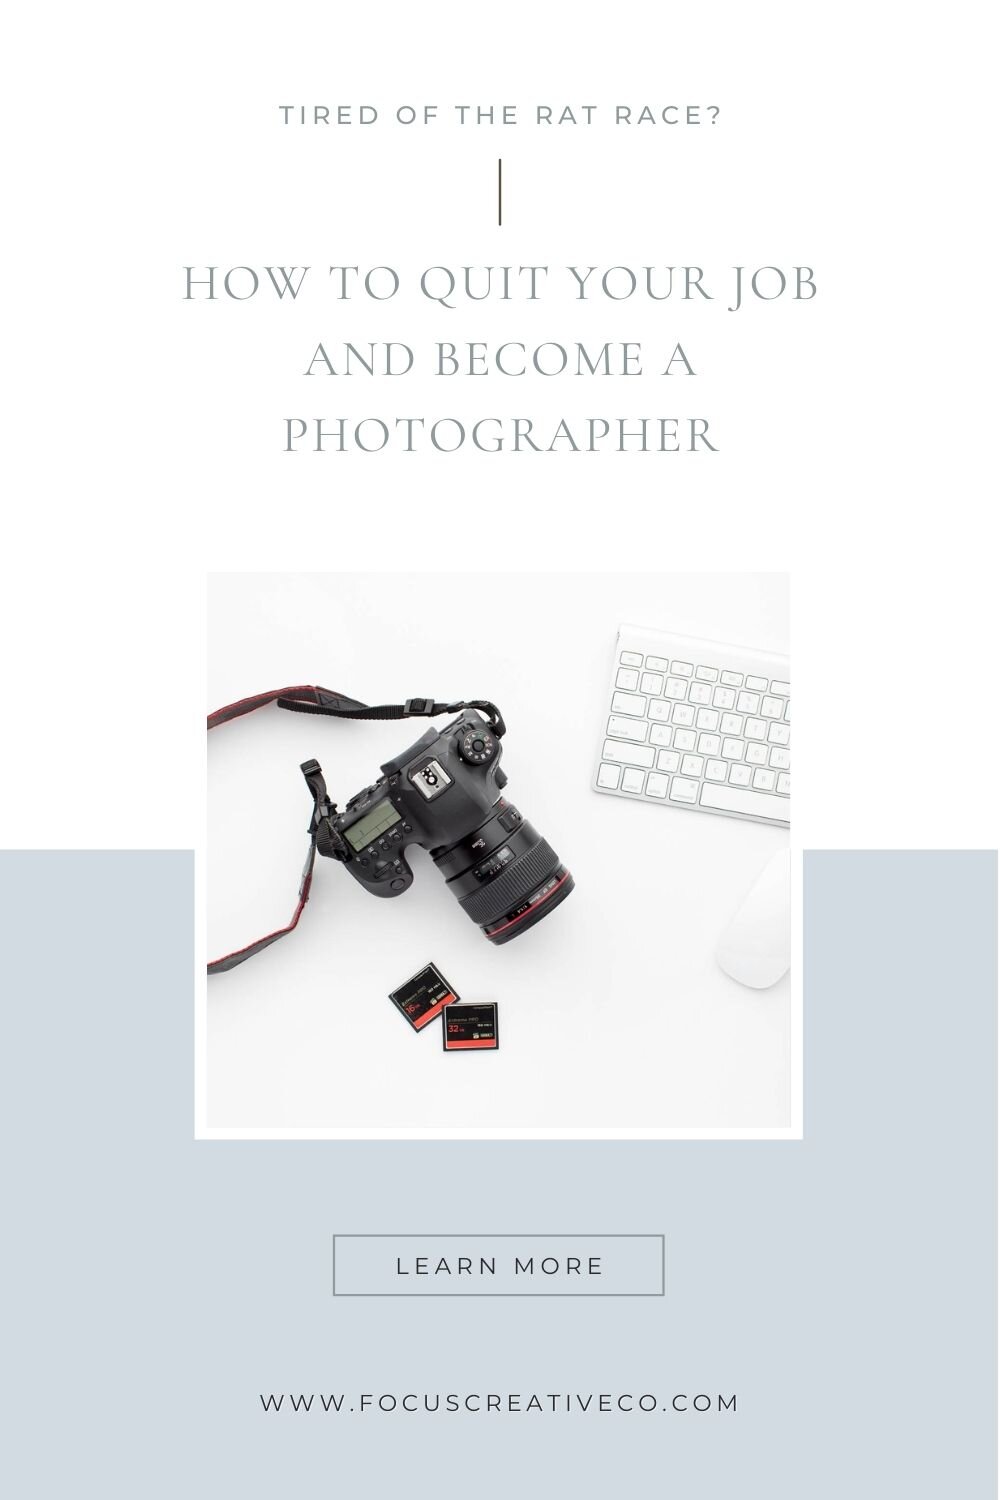 Tired of the Rat Race? How to Quit Your Job and Become a Photographer